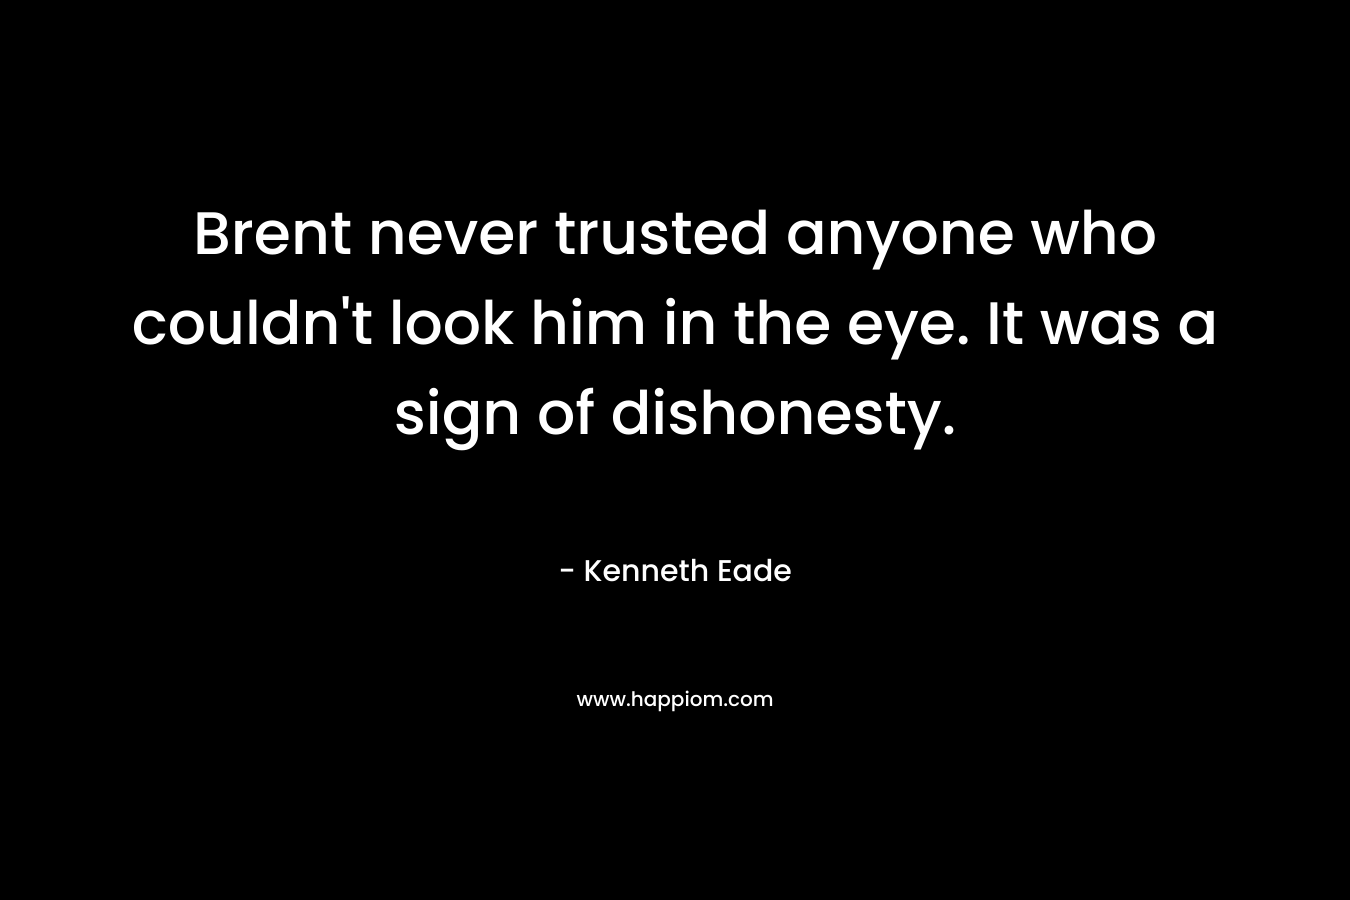 Brent never trusted anyone who couldn’t look him in the eye. It was a sign of dishonesty. – Kenneth Eade